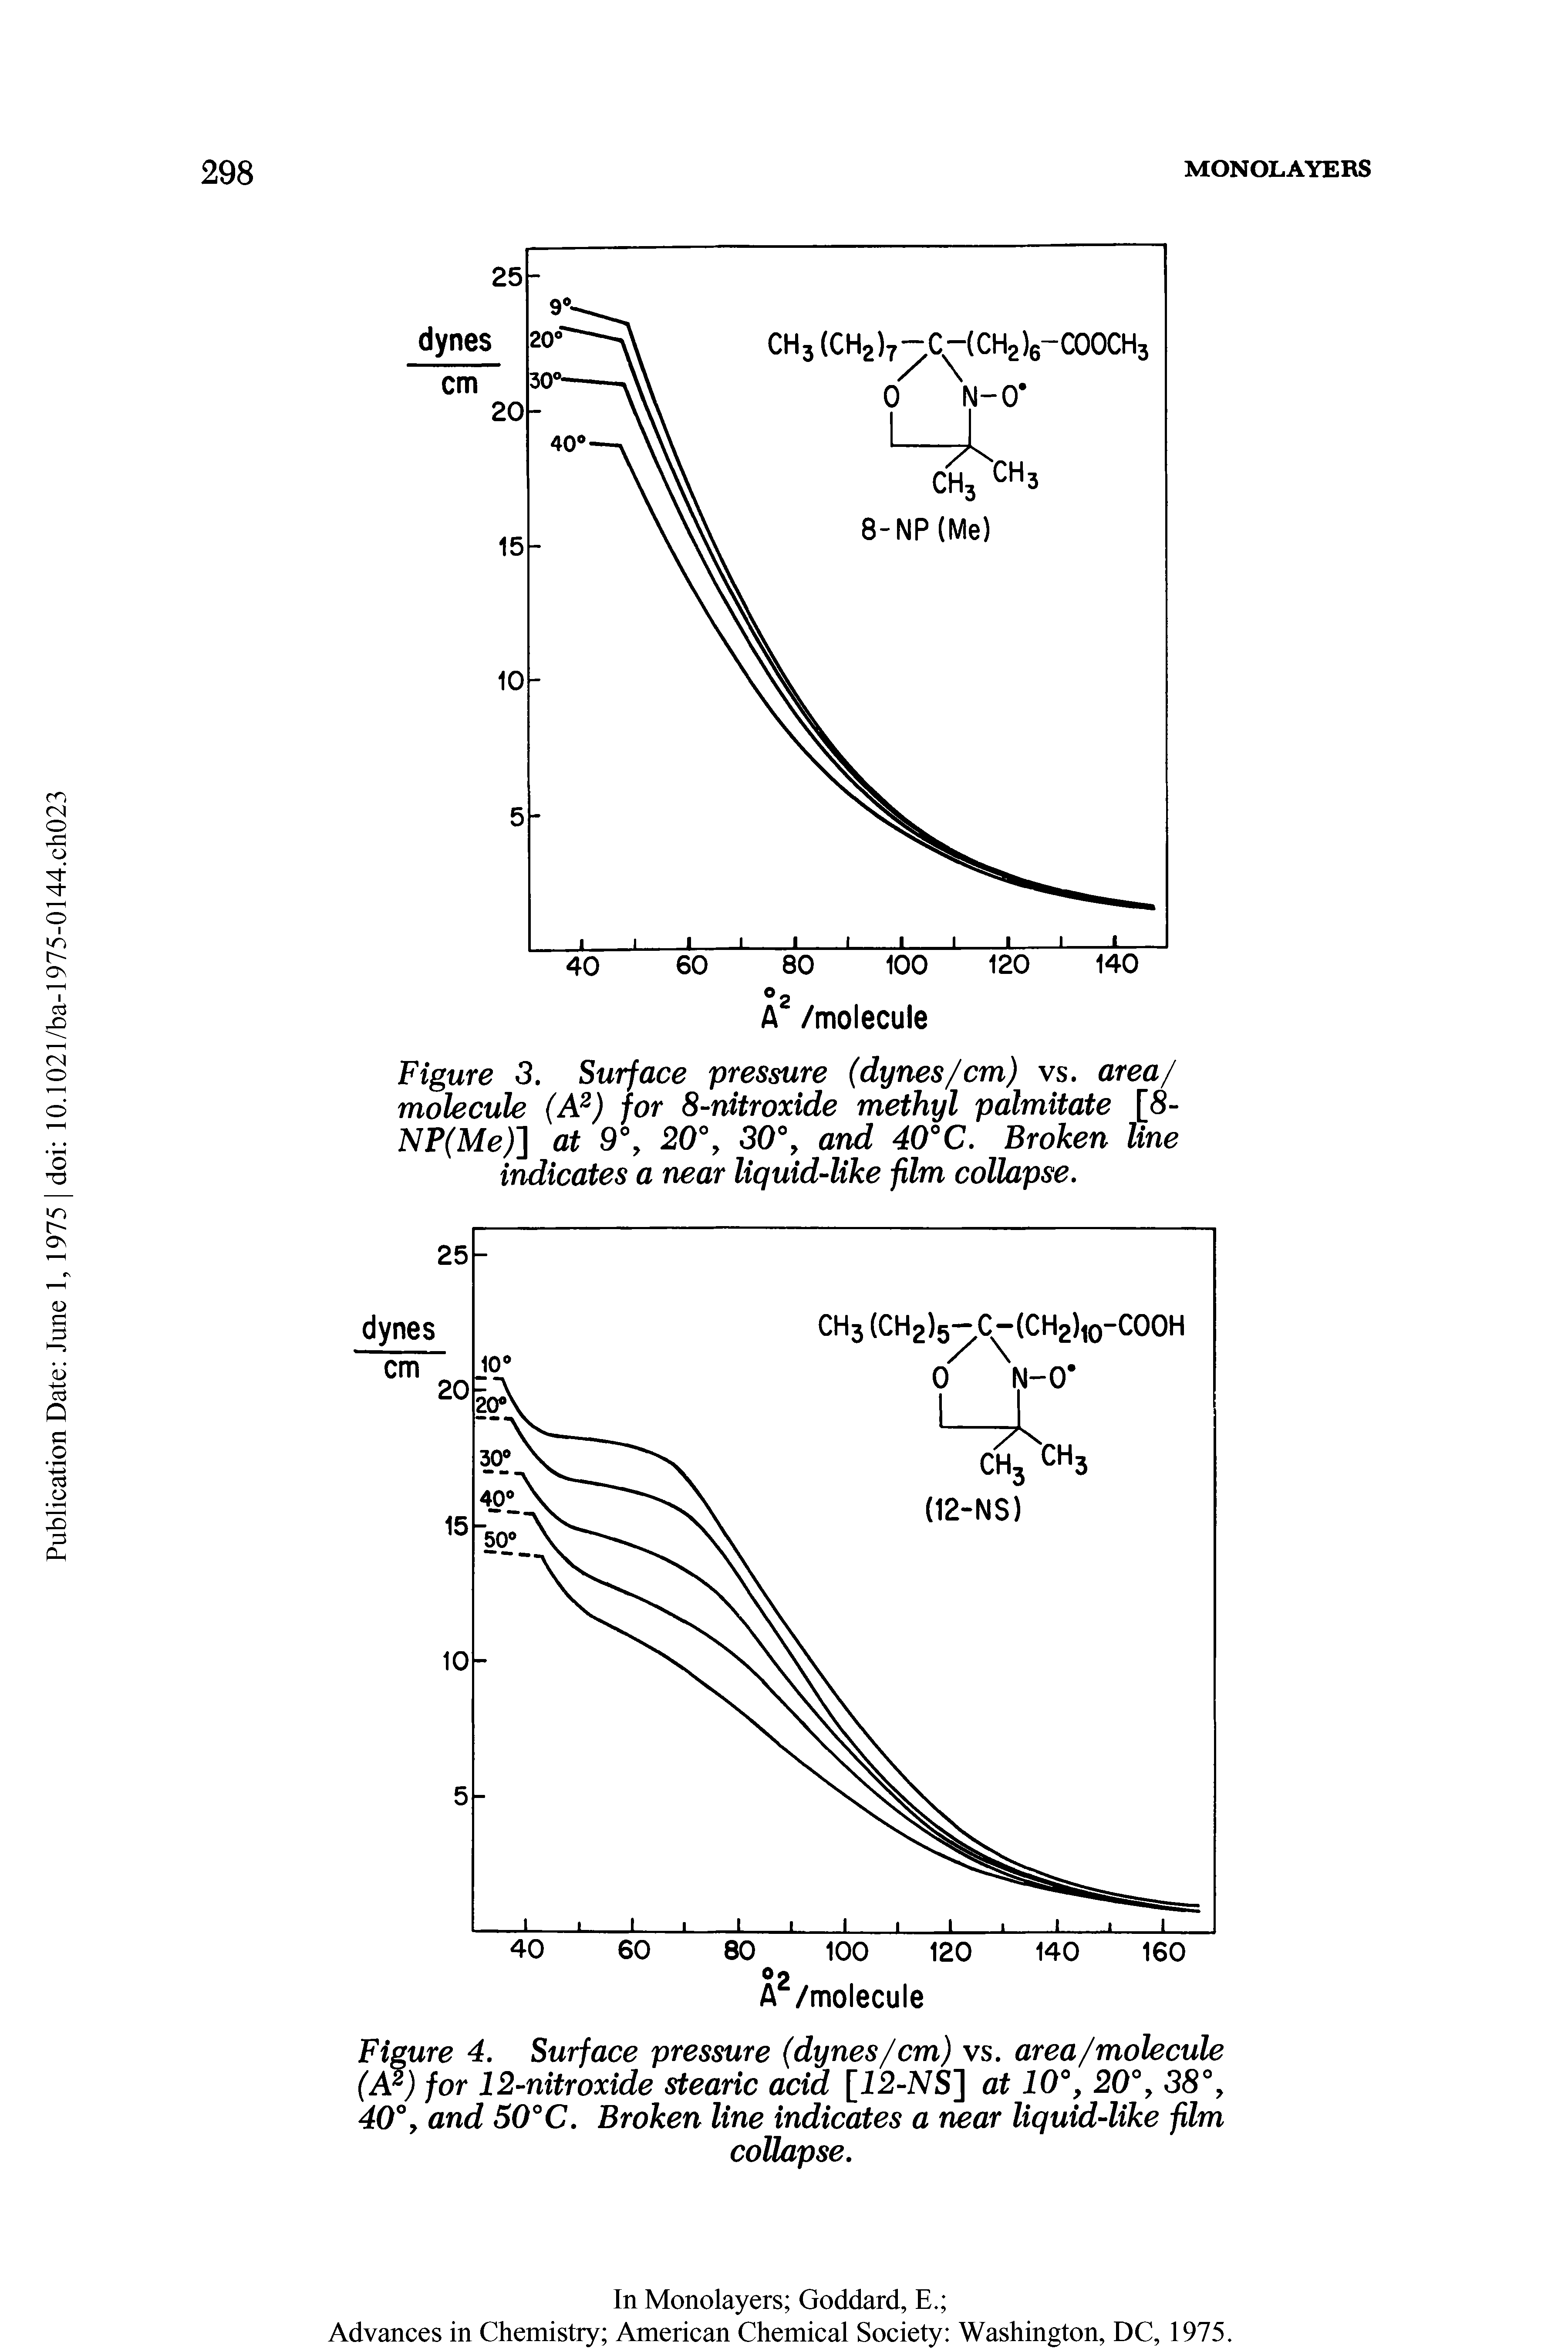 Figure 4. Surface pressure (dynes/cm) vs. area/molecule (A2) for 12-nitroxide stearic acid [I2-NS] at 10°, 20°> 38% 40°y and 50°C. Broken line indicates a near liquid-like film collapse.